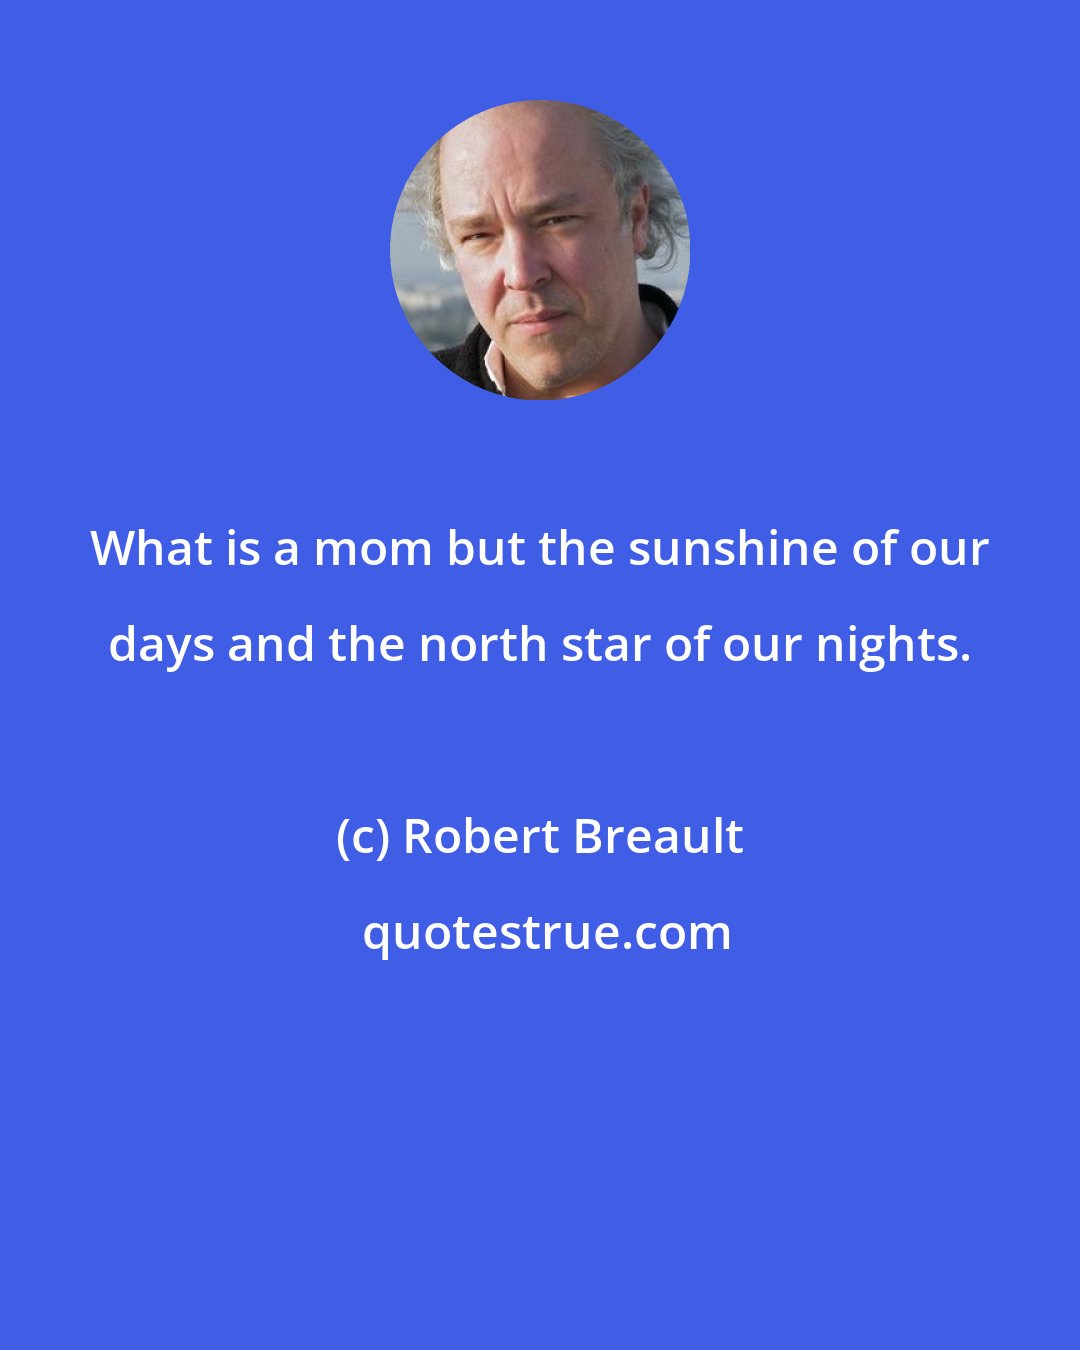 Robert Breault: What is a mom but the sunshine of our days and the north star of our nights.